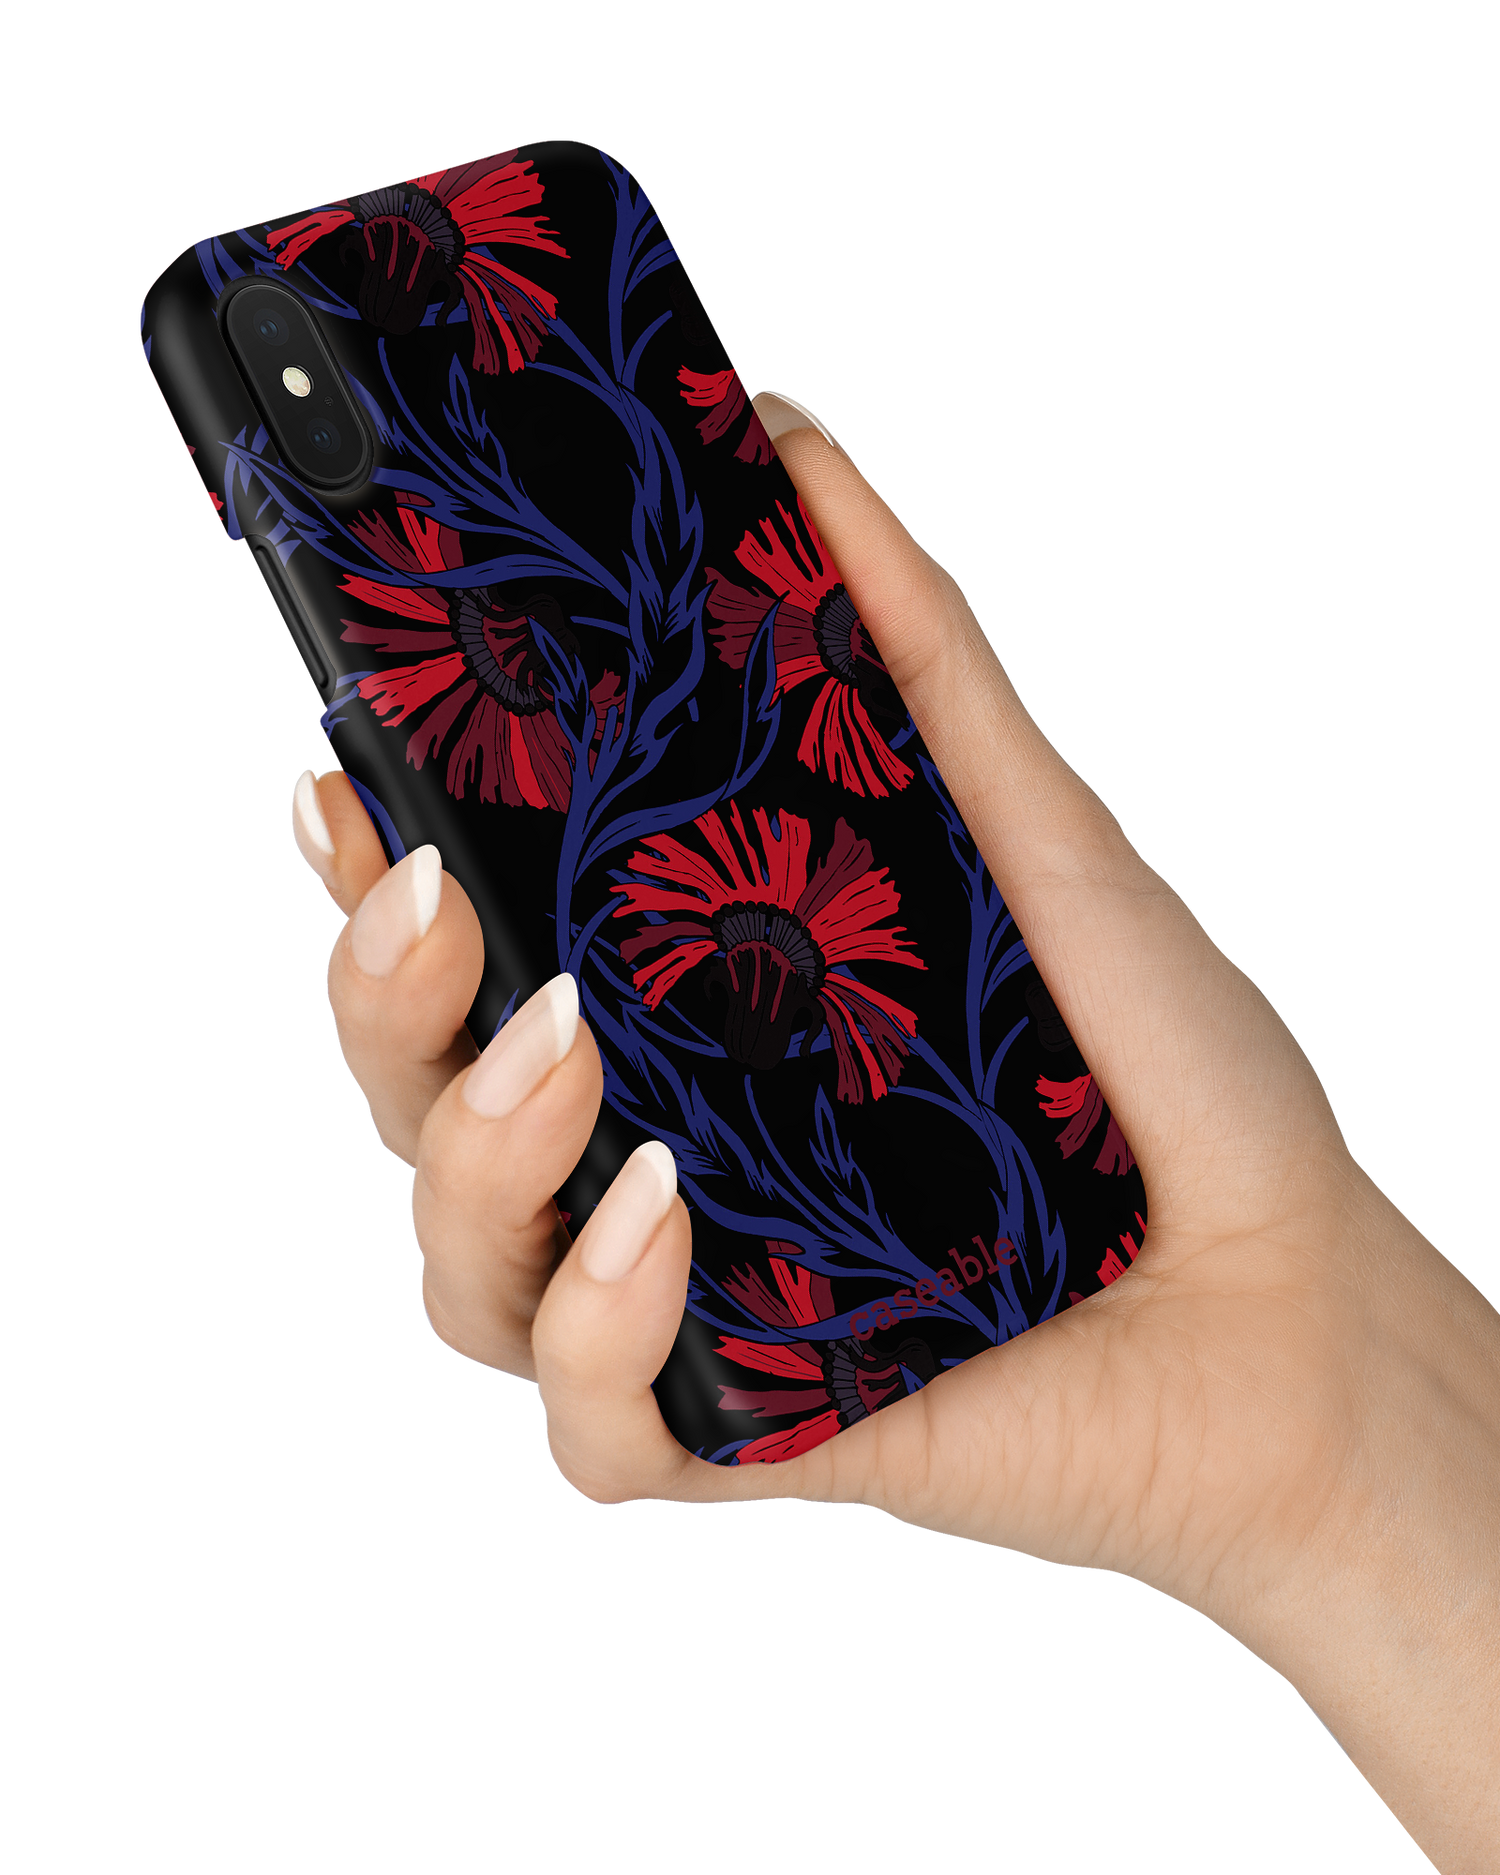 Midnight Floral Hard Shell Phone Case Apple iPhone X, Apple iPhone XS held in hand